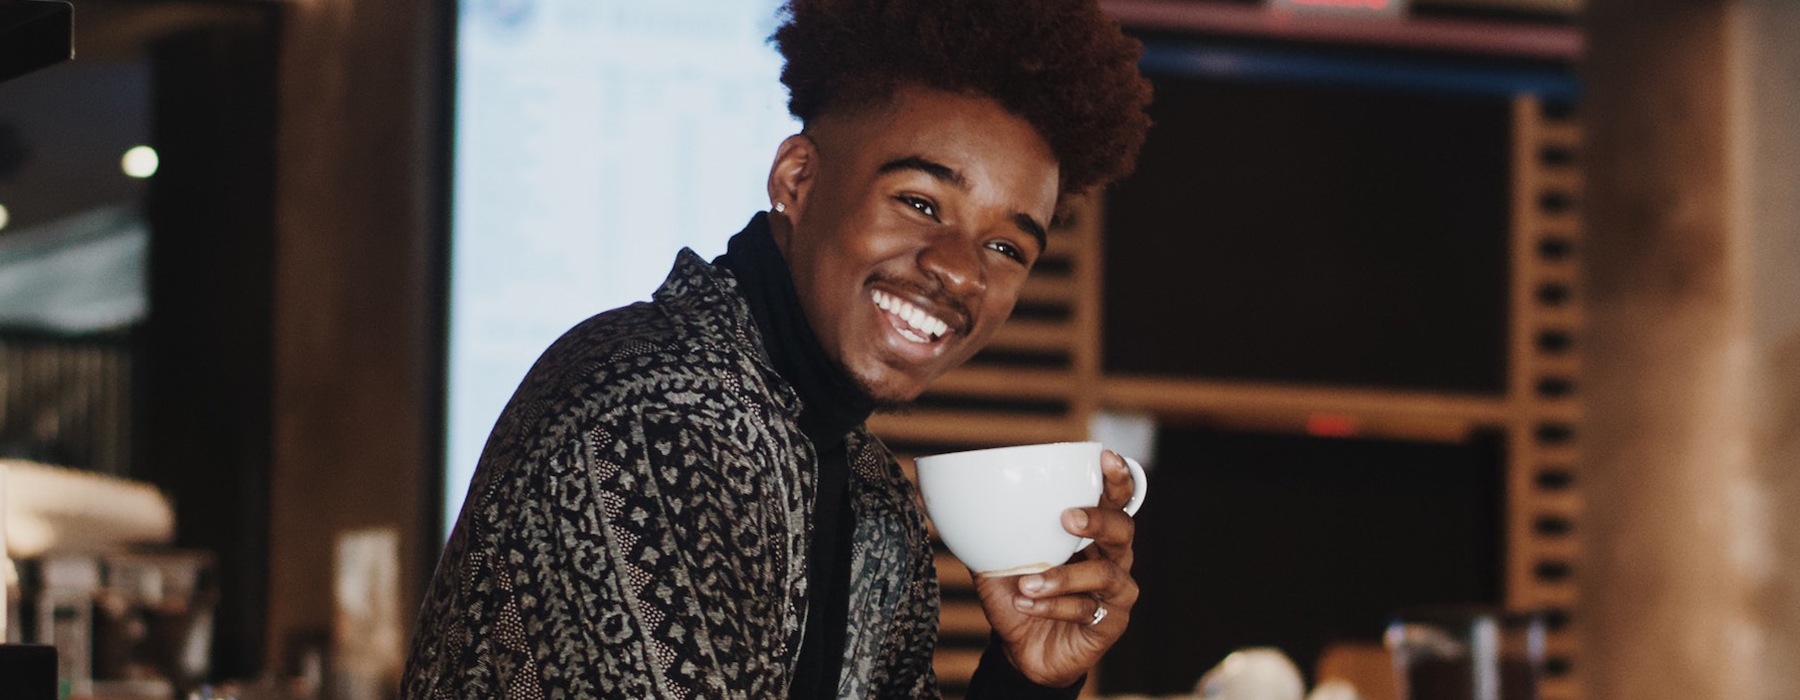 lifestyle image of a barista smiling 